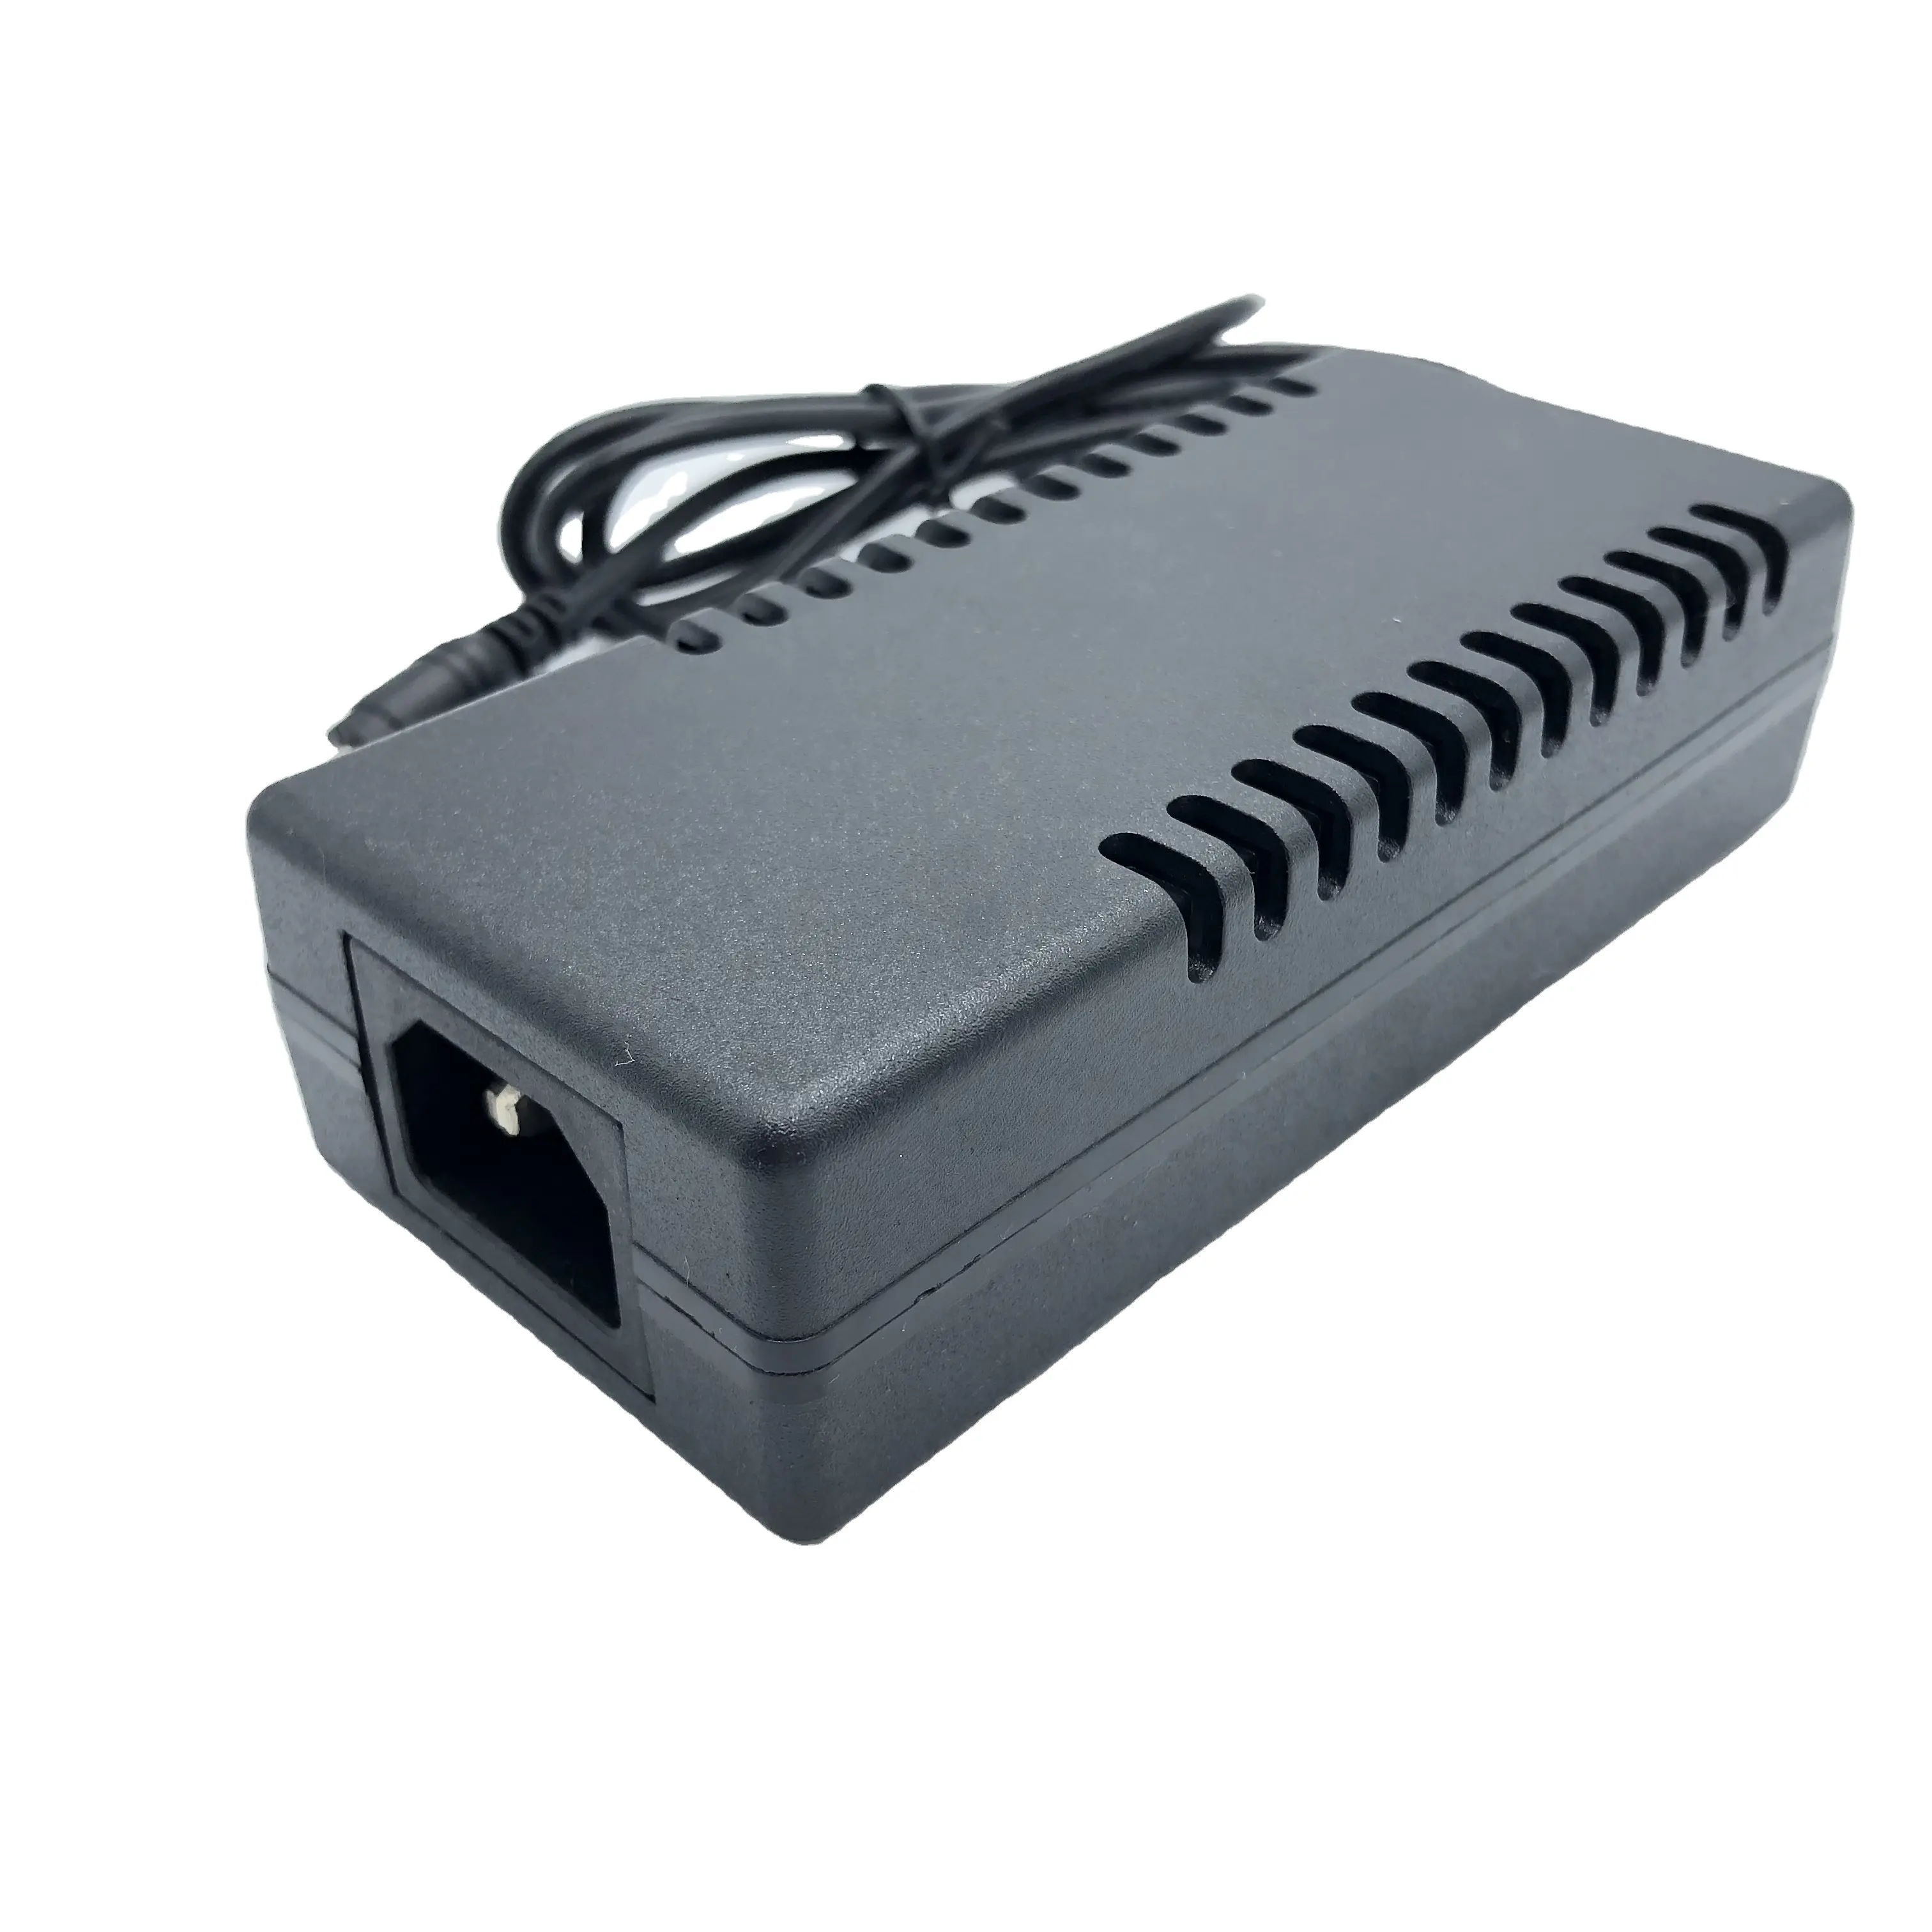 Factory price Power Adapter 5V 9V 12V 15V 24V 1A 2A 3A 4A 5A 6A 7A 8A 9A 10A AC/DC Power Supply Adaptor for LED LCD CCTV